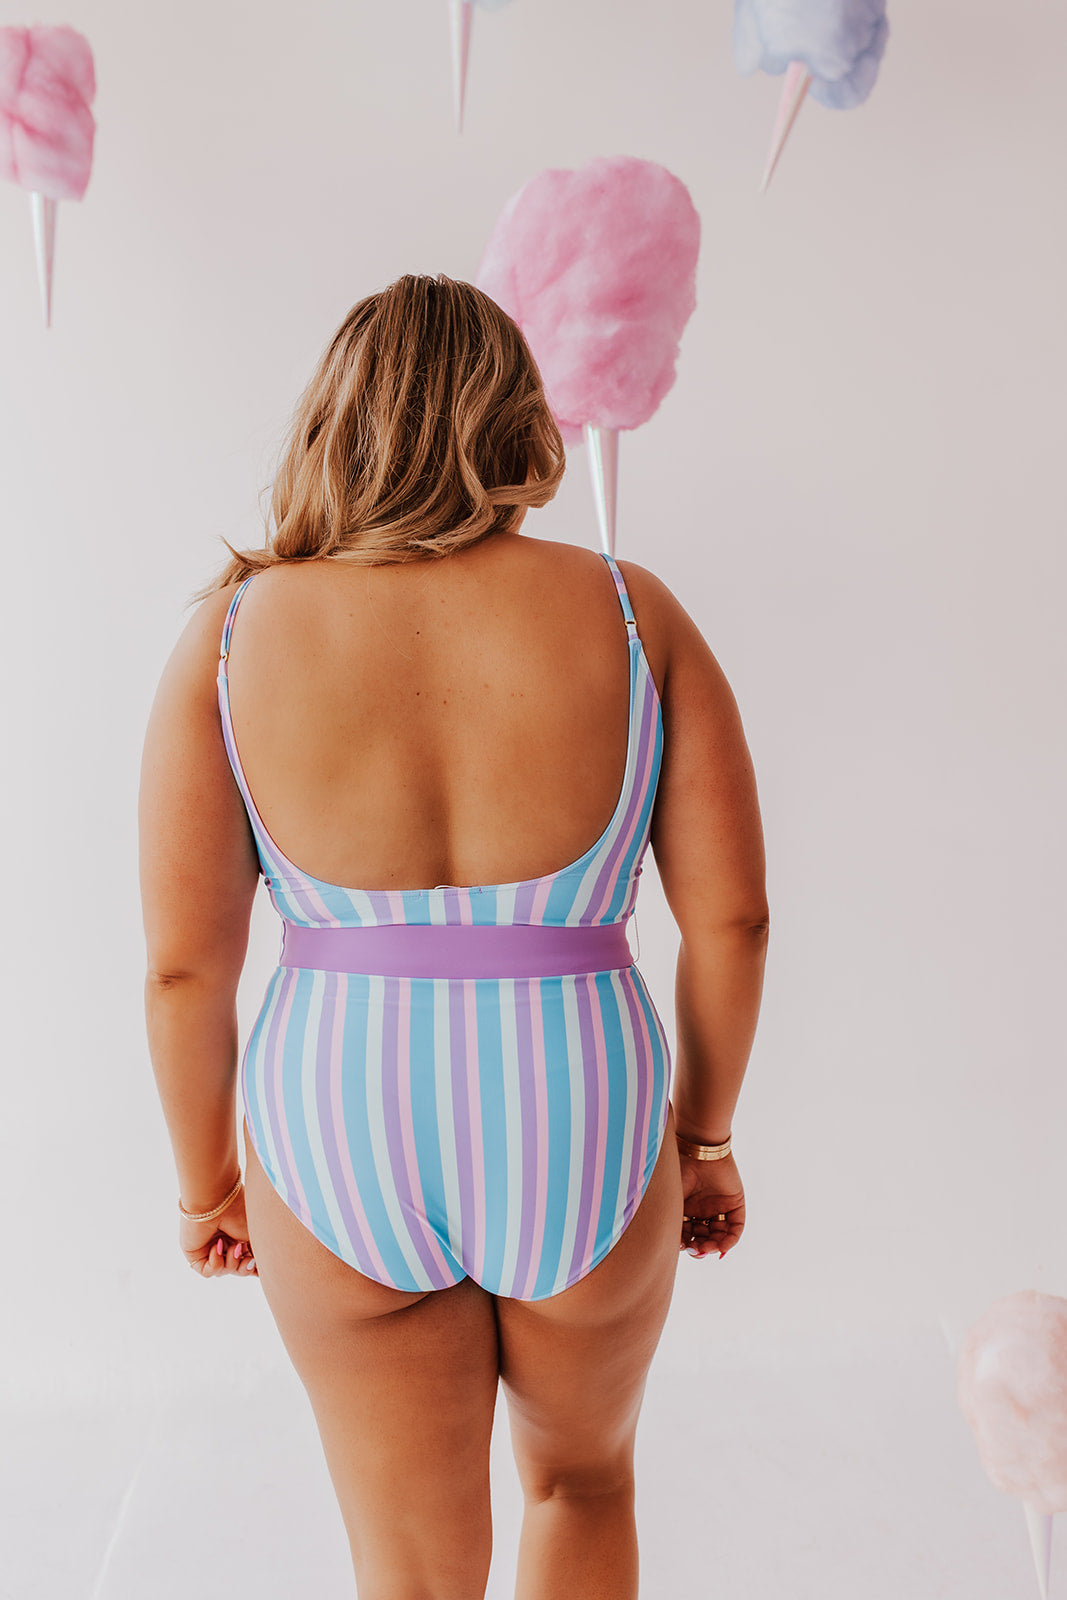 GIRLS BUTTON FRONT ONE PIECE IN COTTON CANDY PINK BY SARAH TRIPP X